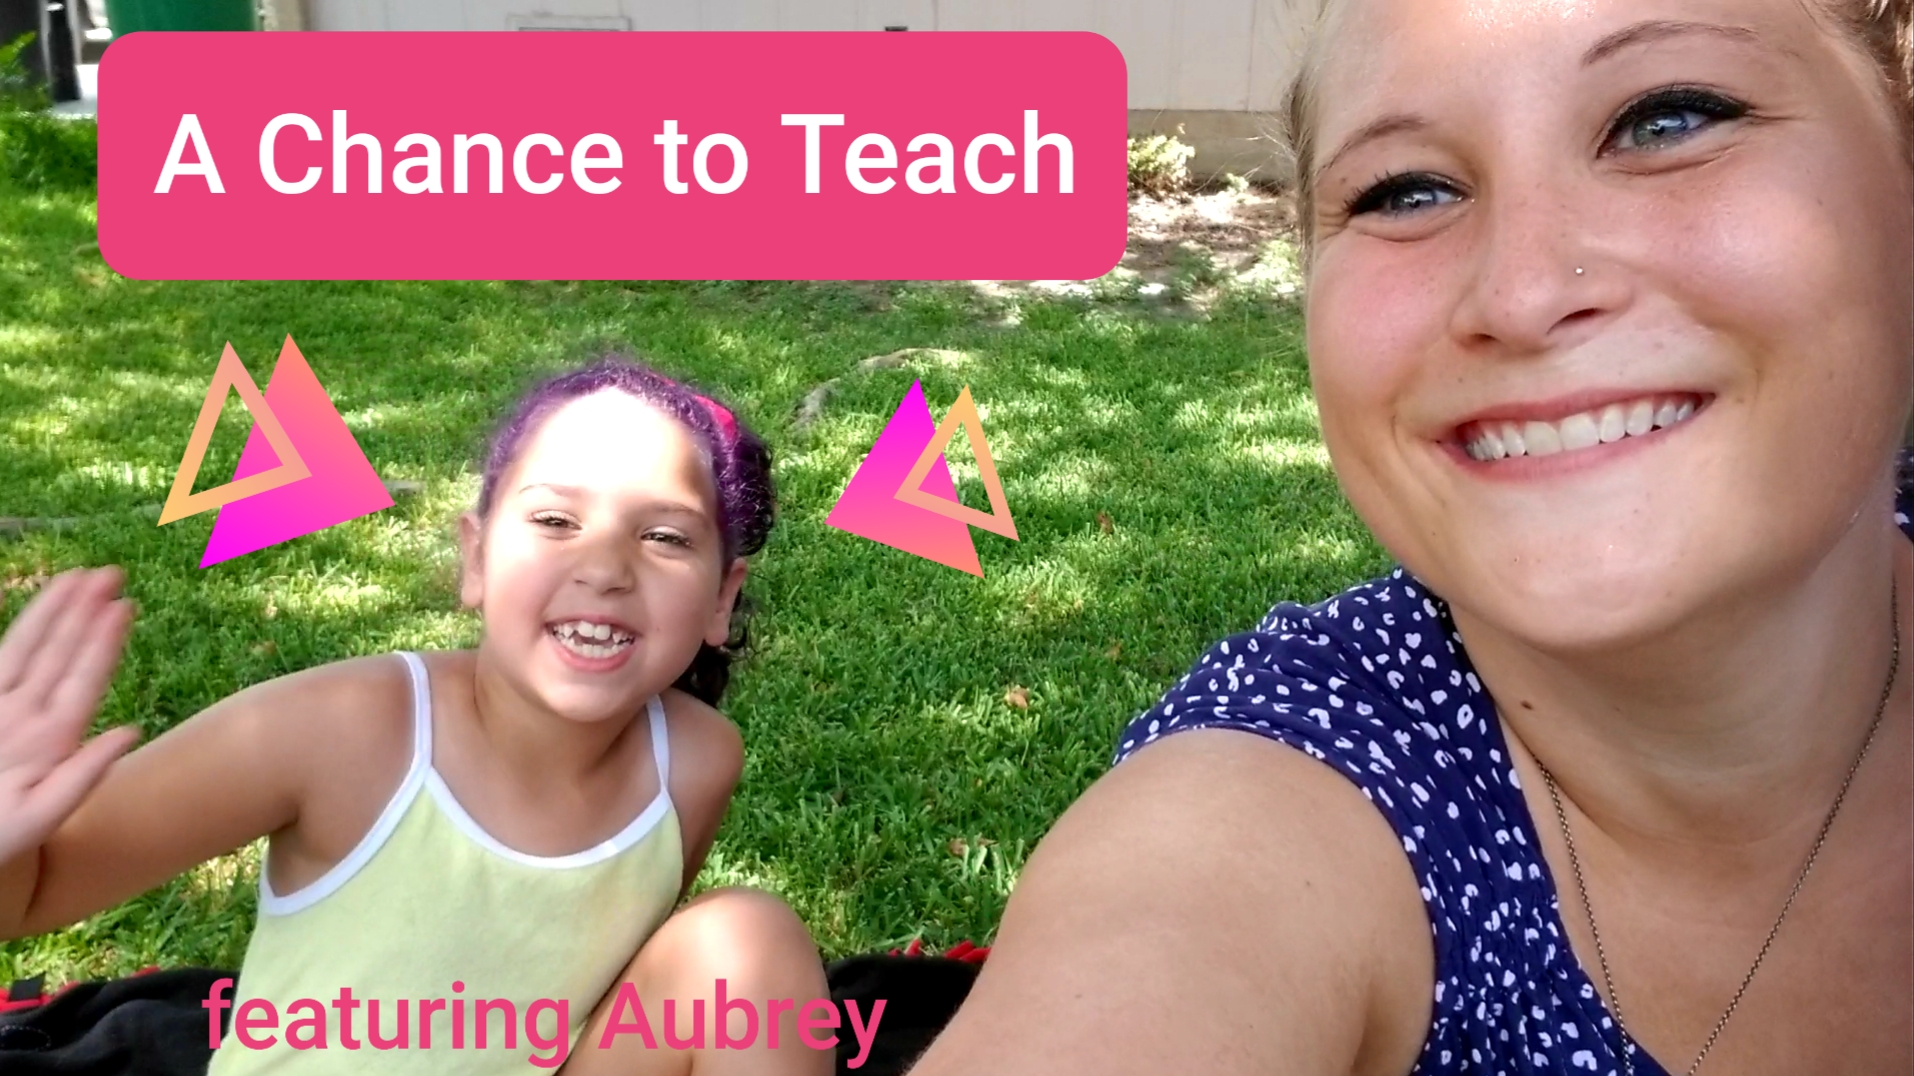 Mary Luehring and Aubrey: Teaching a Lesson School of Science and Technology